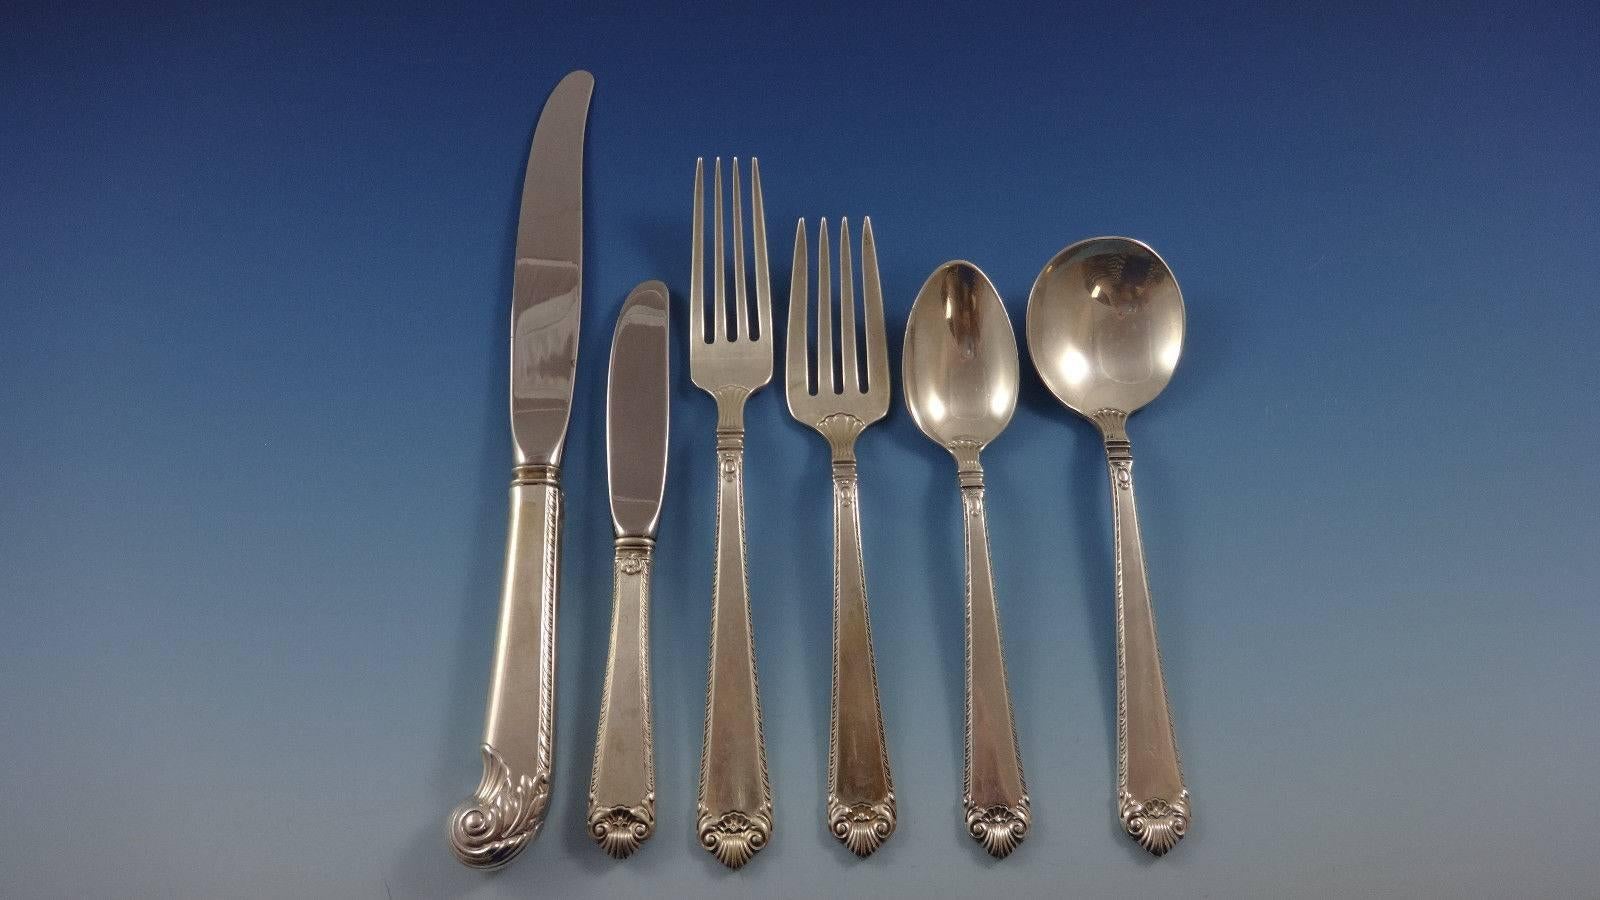 An exquisite sterling flatware pattern inspired by the designs of noted European silversmith Paul DeLamerie, the silversmith for the King of England during the first half of the 17th century. The Lamarie sterling silver flatware pattern features